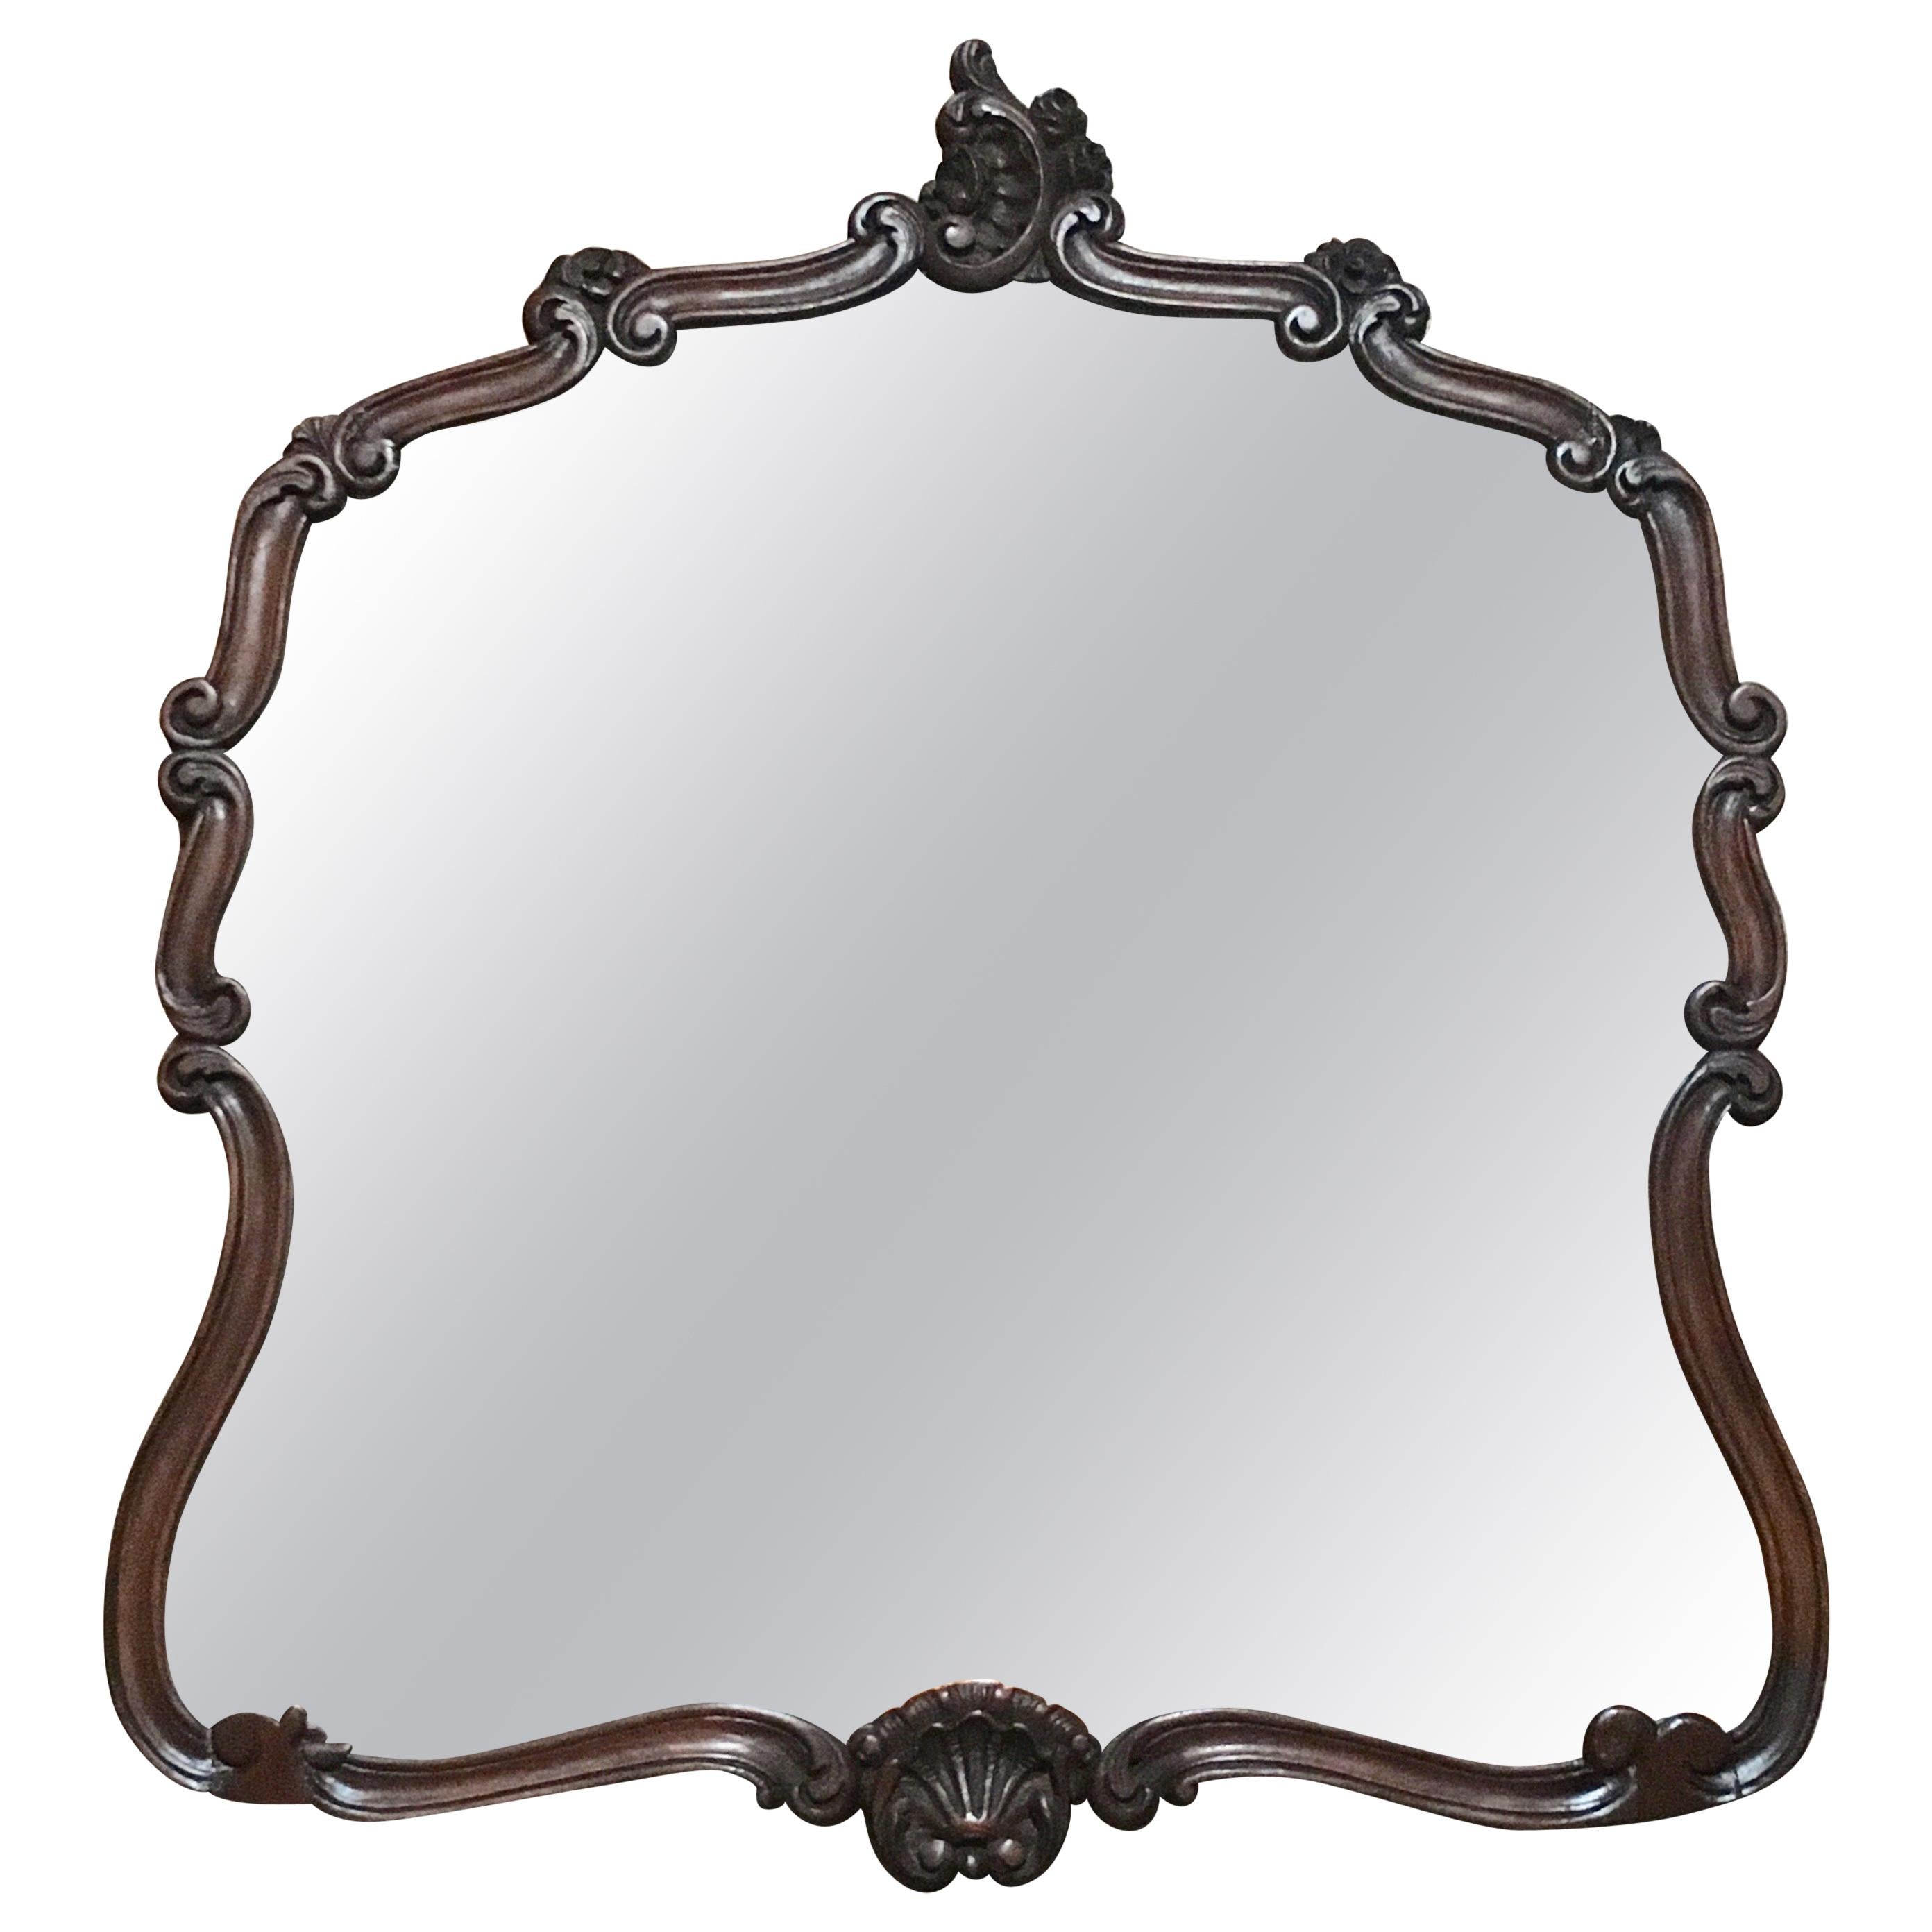 French Rococo Style Mirror Frame